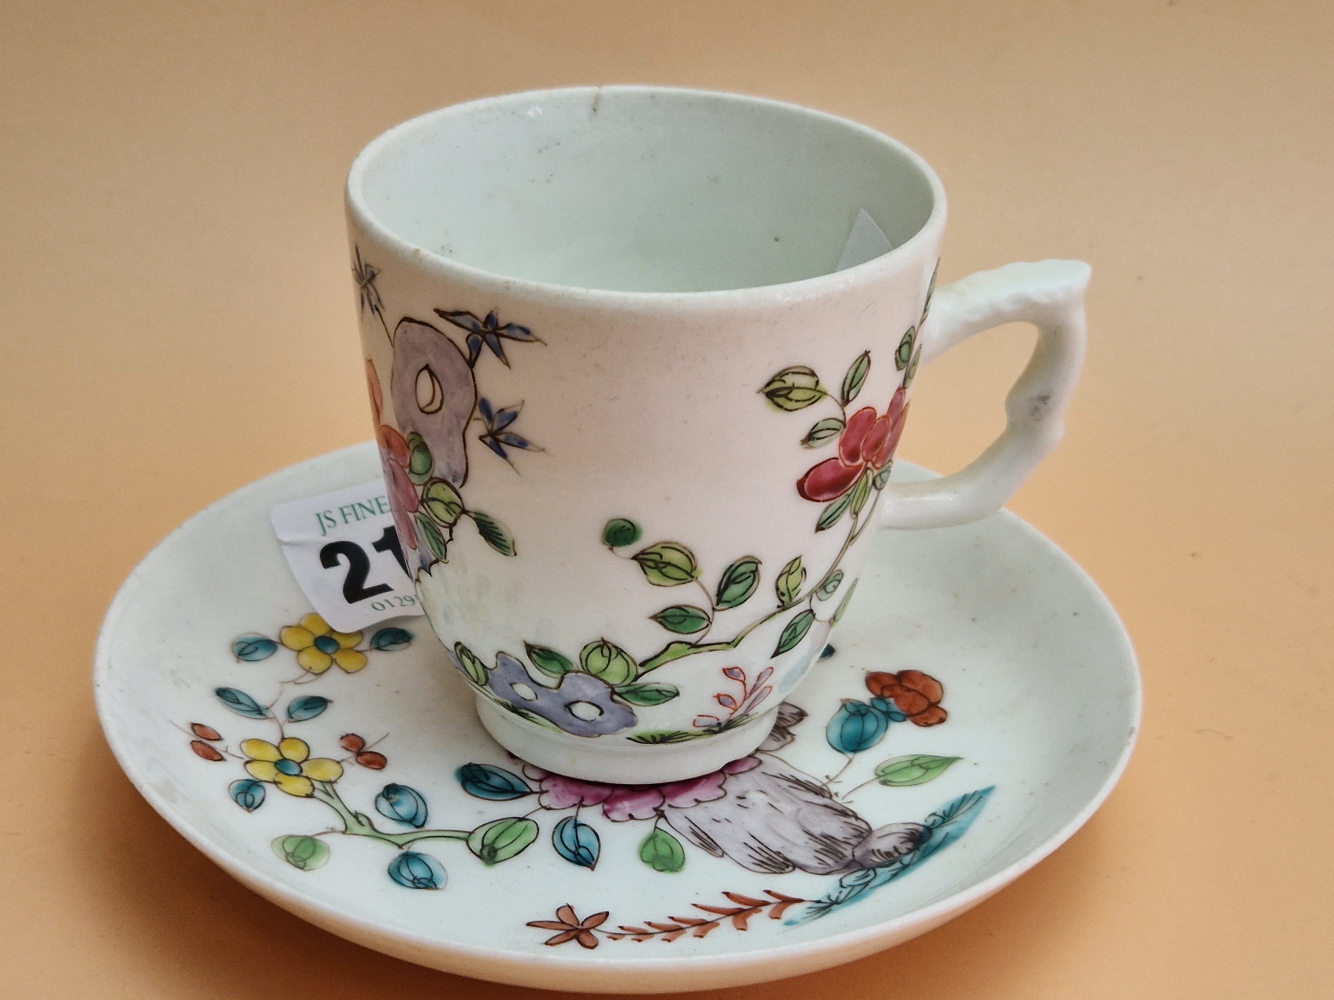 A BOW PORCELAIN COFFEE CUP AND SAUCER PAINTED WITH FLOWERS GROWING BY ROCKS - Image 2 of 6